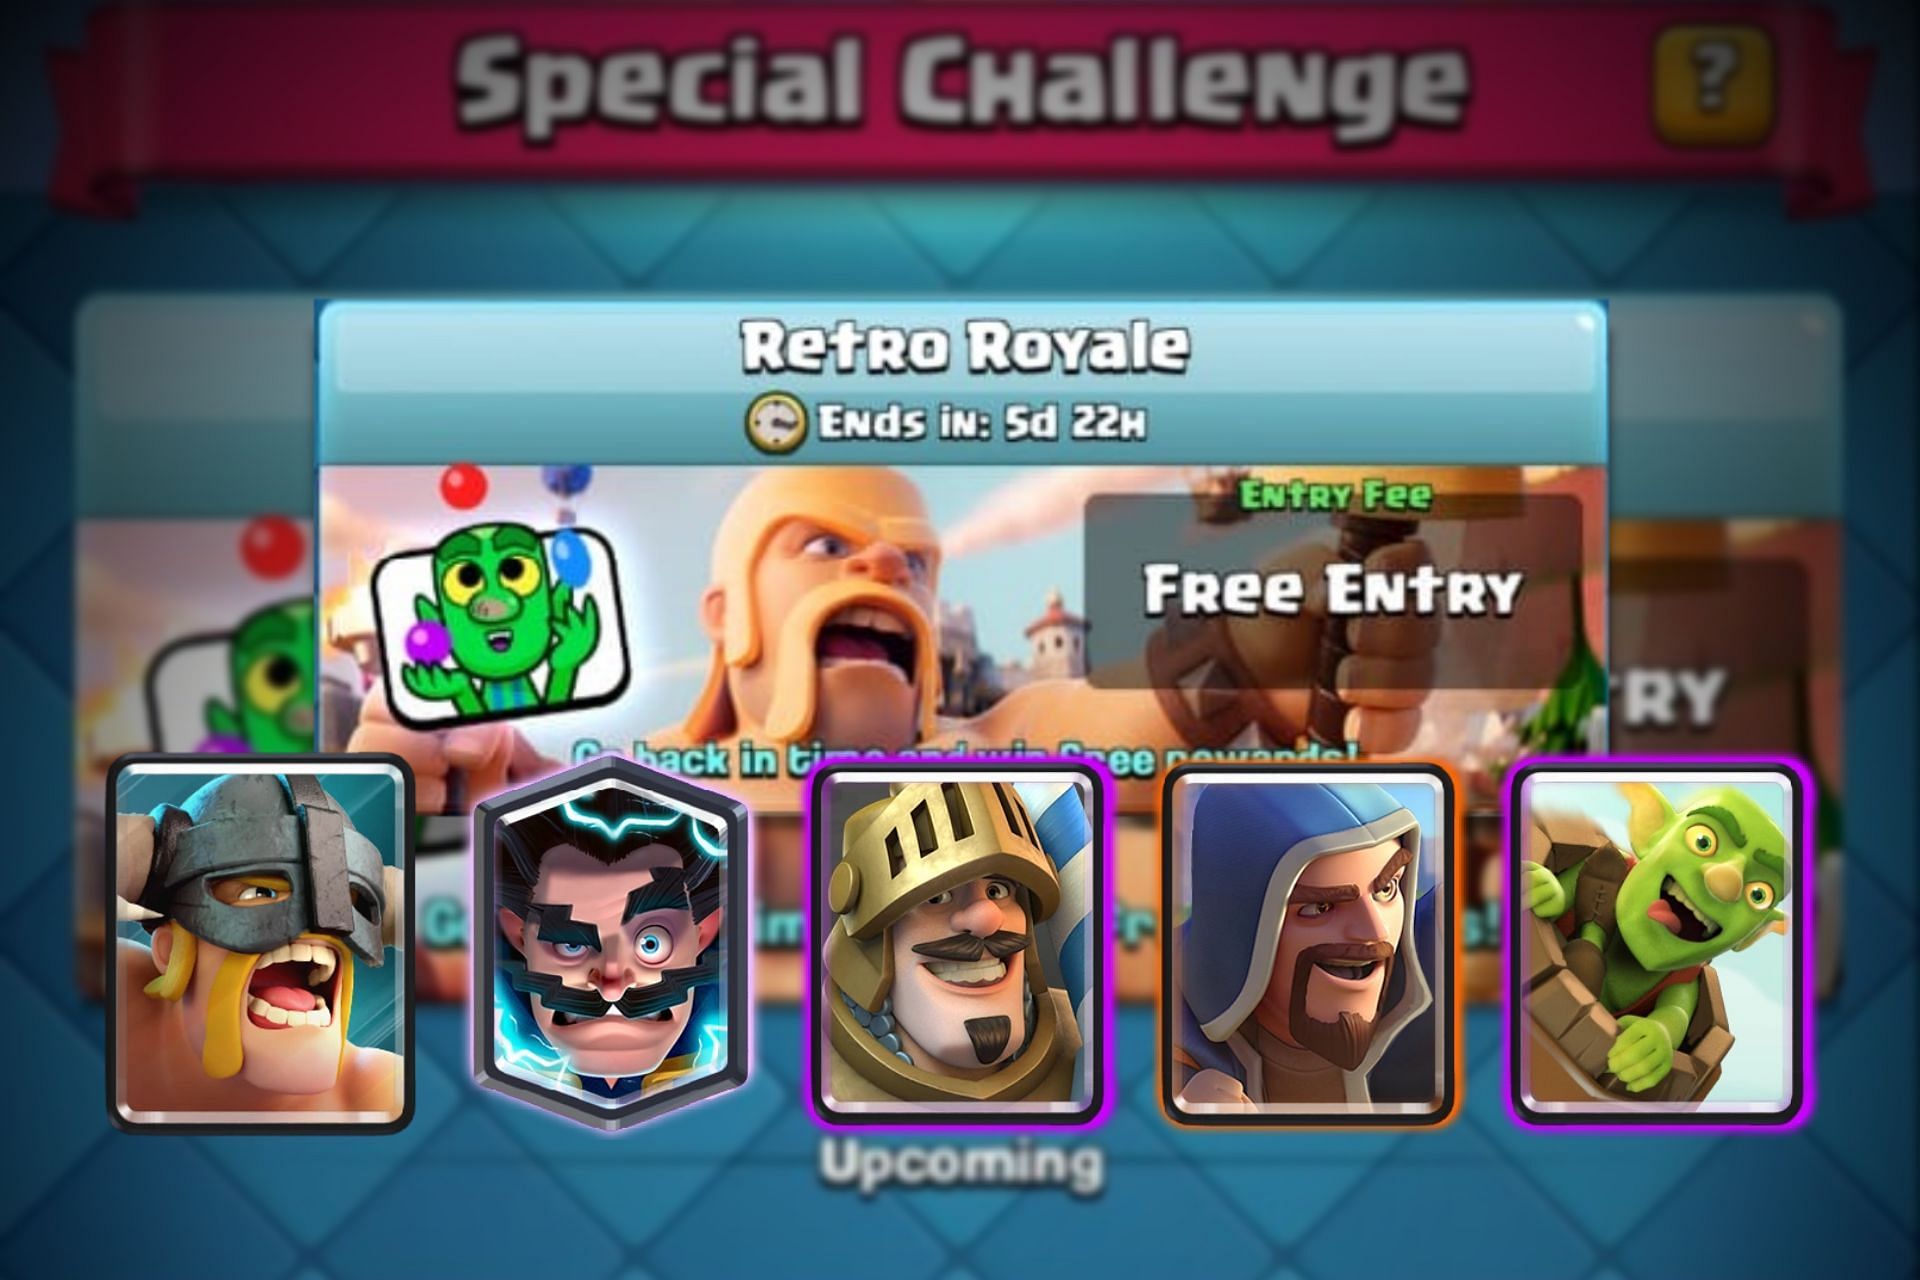 5 best cards for December's Classic Challenge in Clash Royale